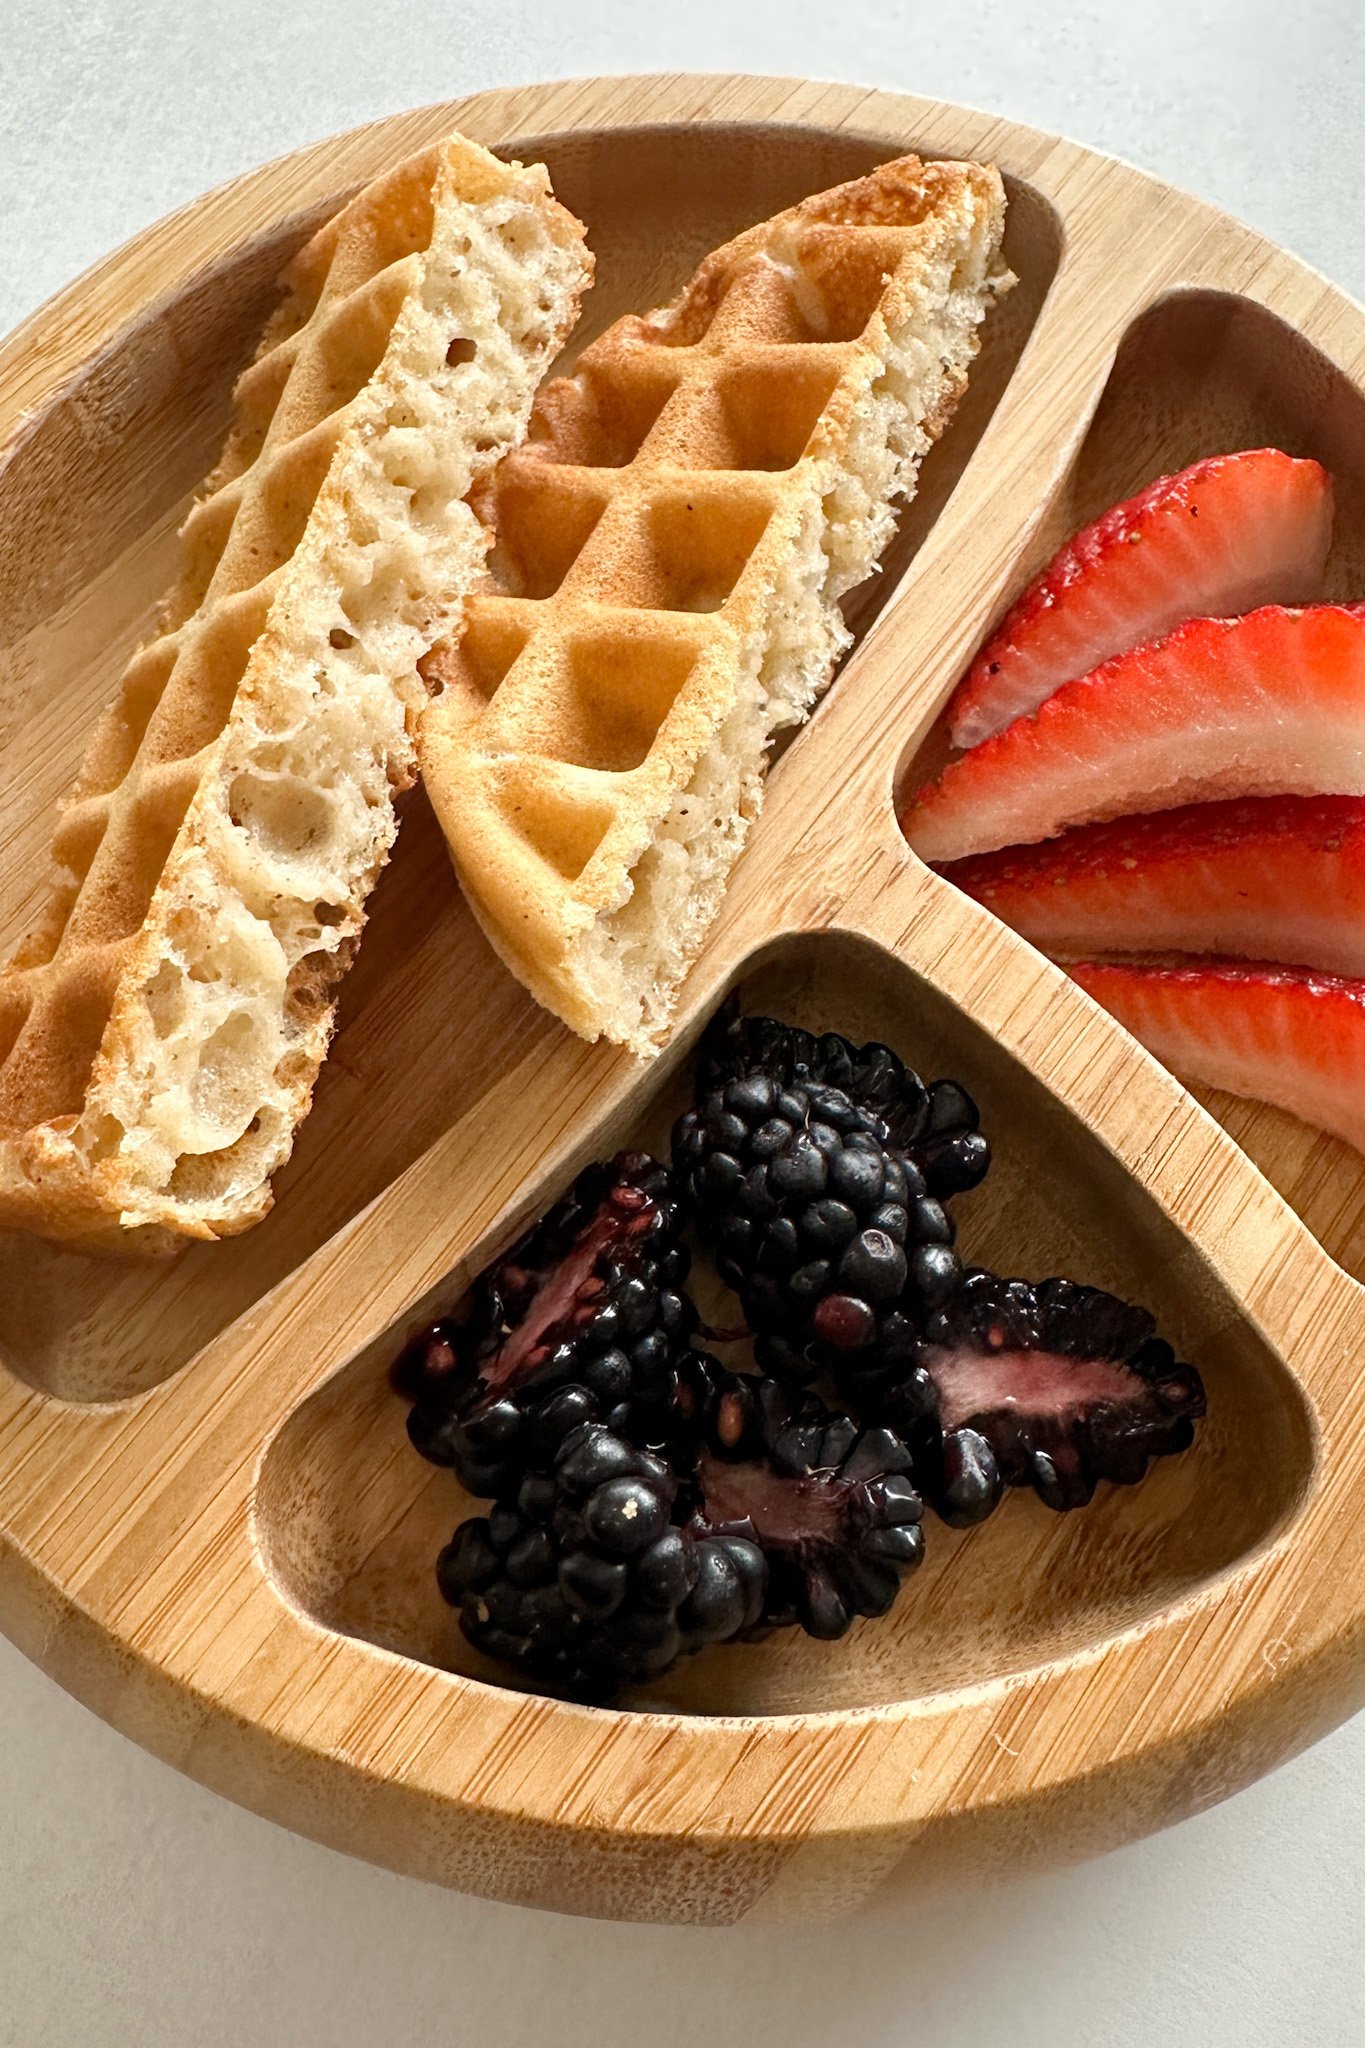 Egg free waffles served with strawberries and blackberries.